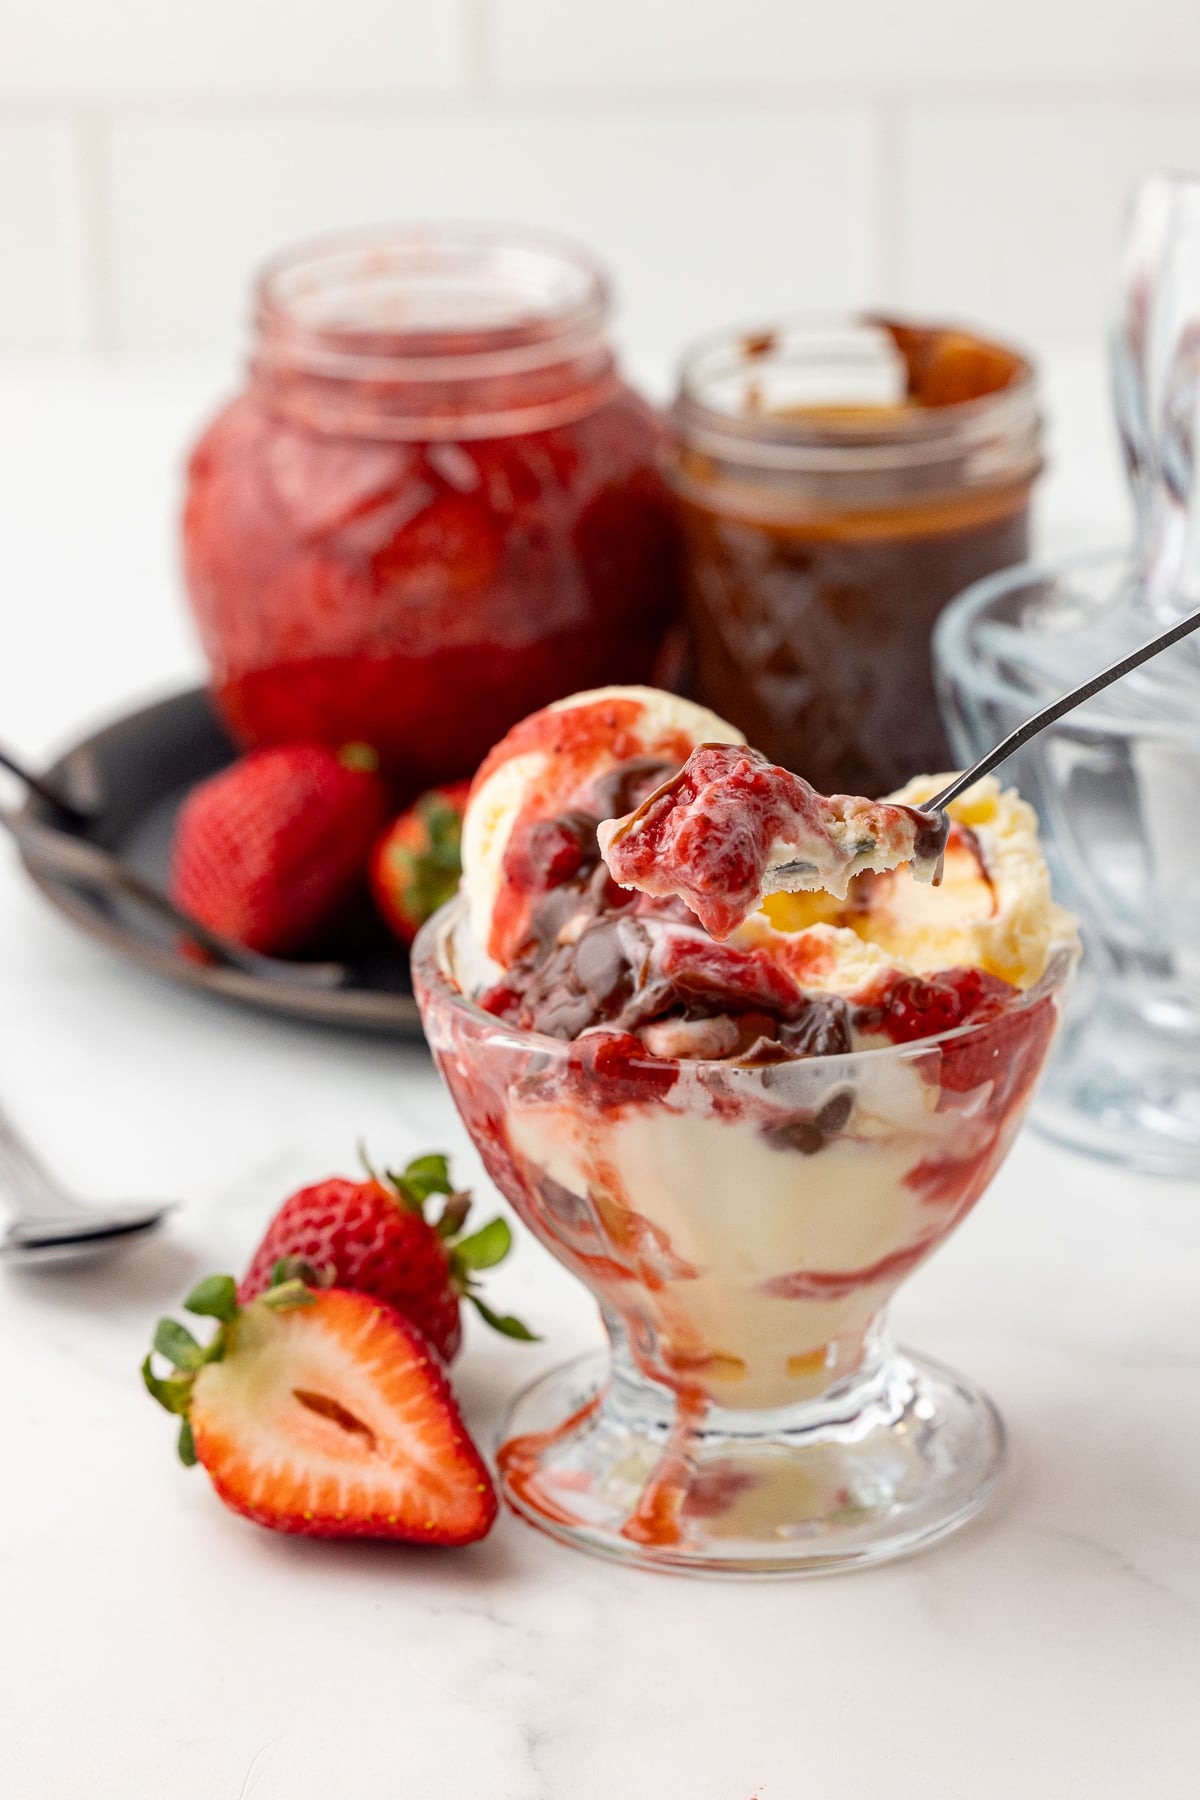 ice cream in a sundae cup topped with strawberry compote and chocolate sauce, with a jar of compote and a jar of sauce in the background